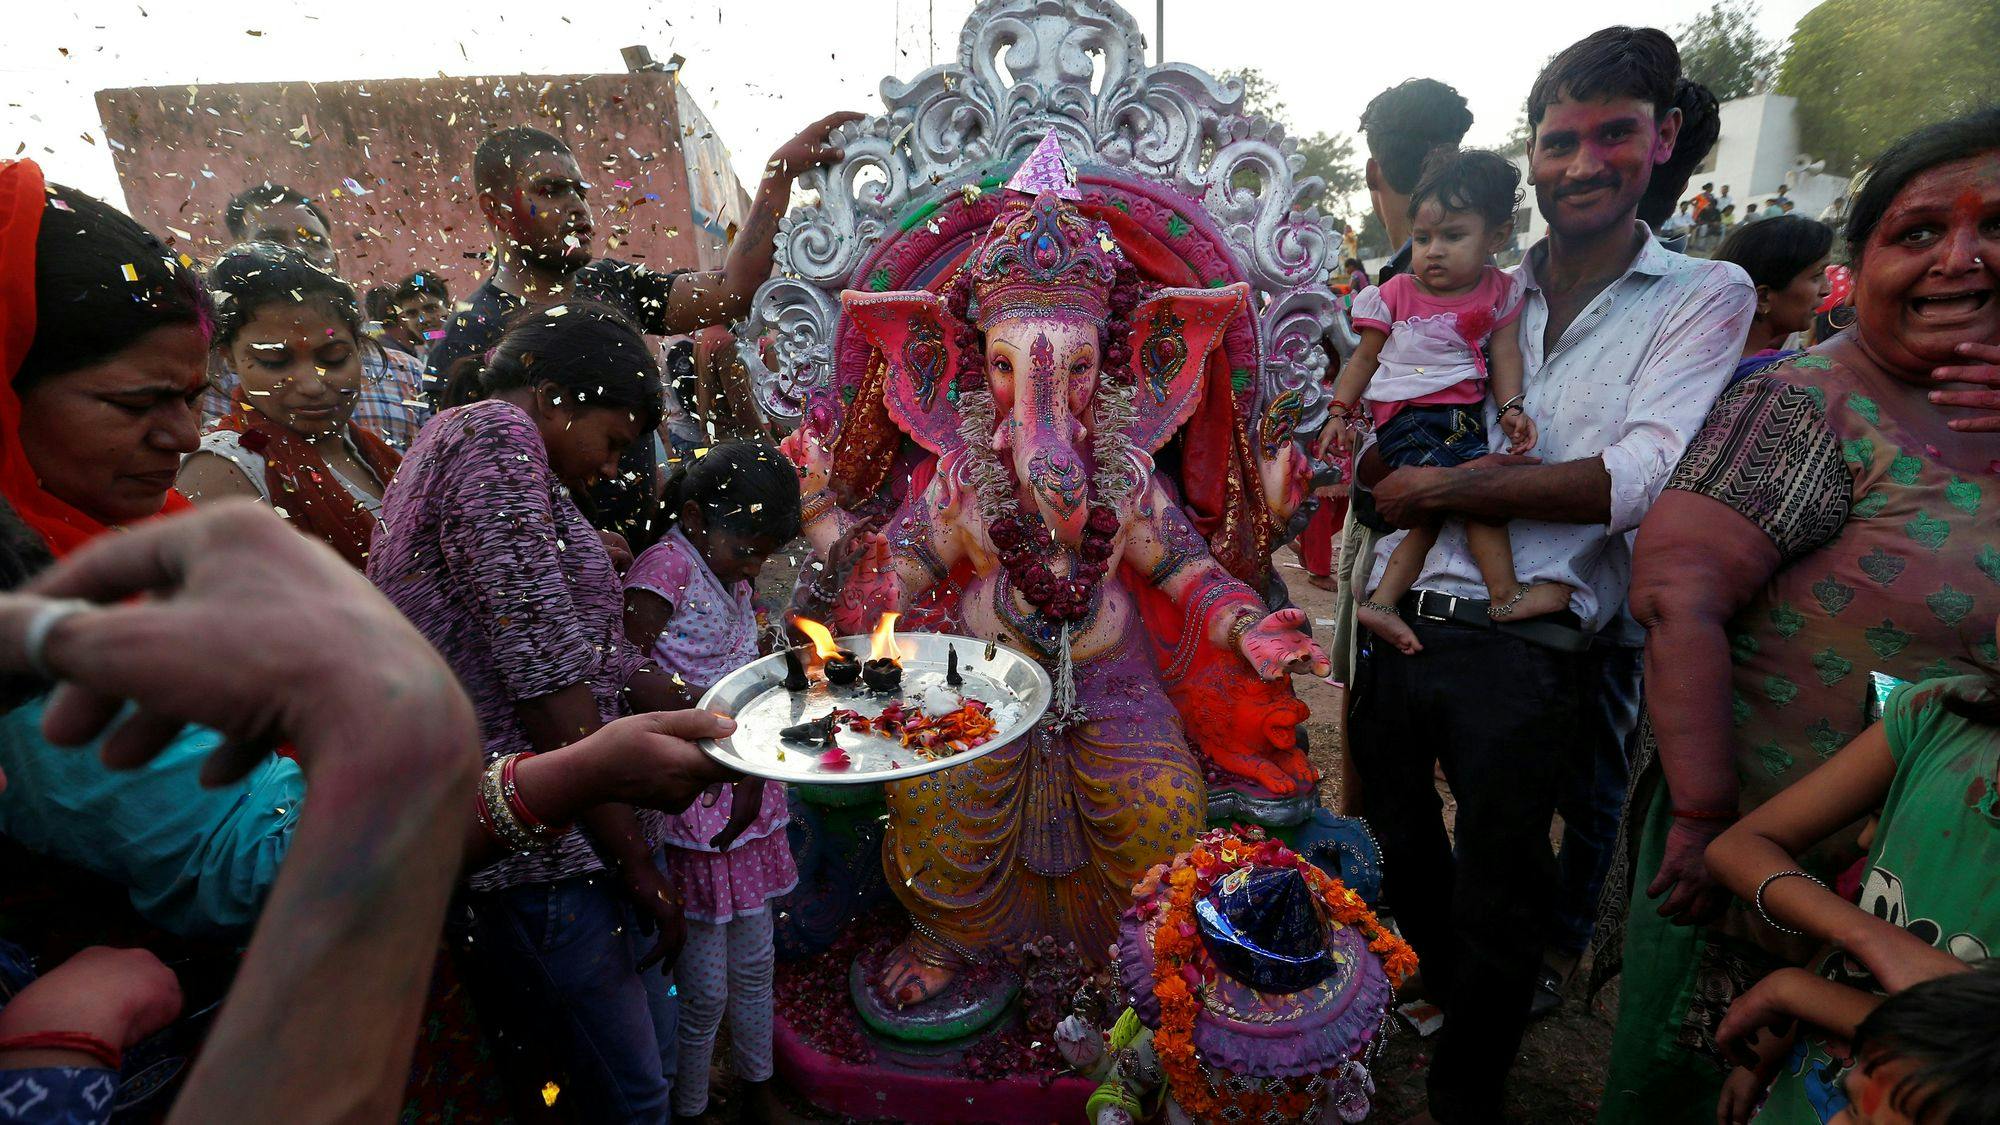 The robots are coming for one of Hinduism's holiest ceremonies